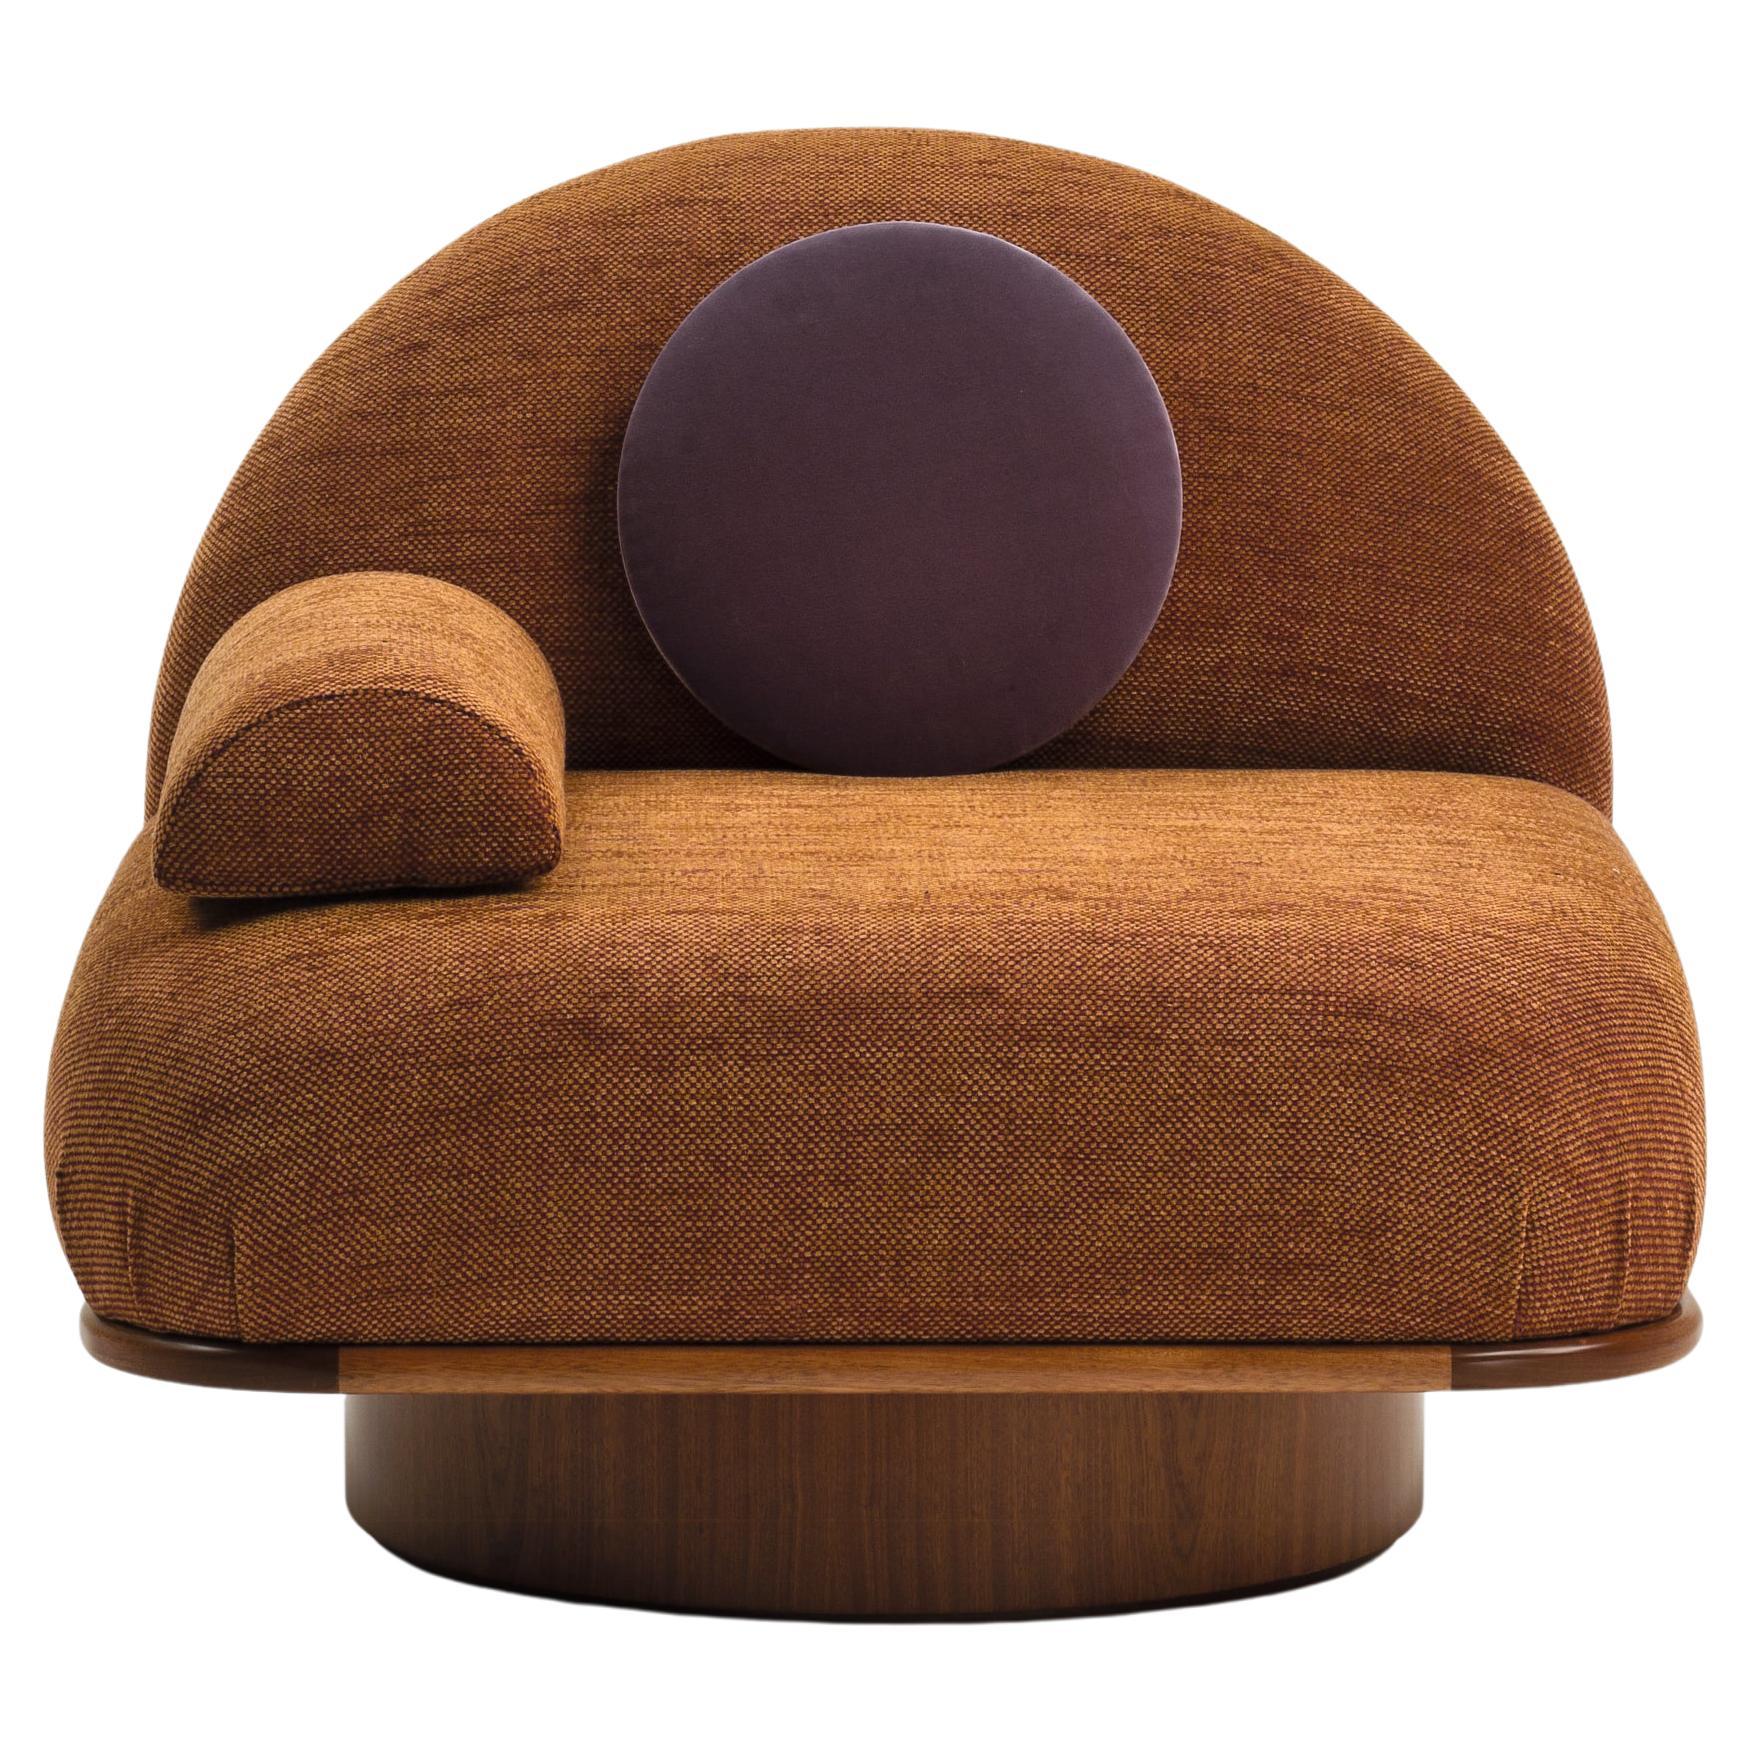 THUMB Armchair in Mahogany and Maple Wood with Padded Seat and Back For Sale